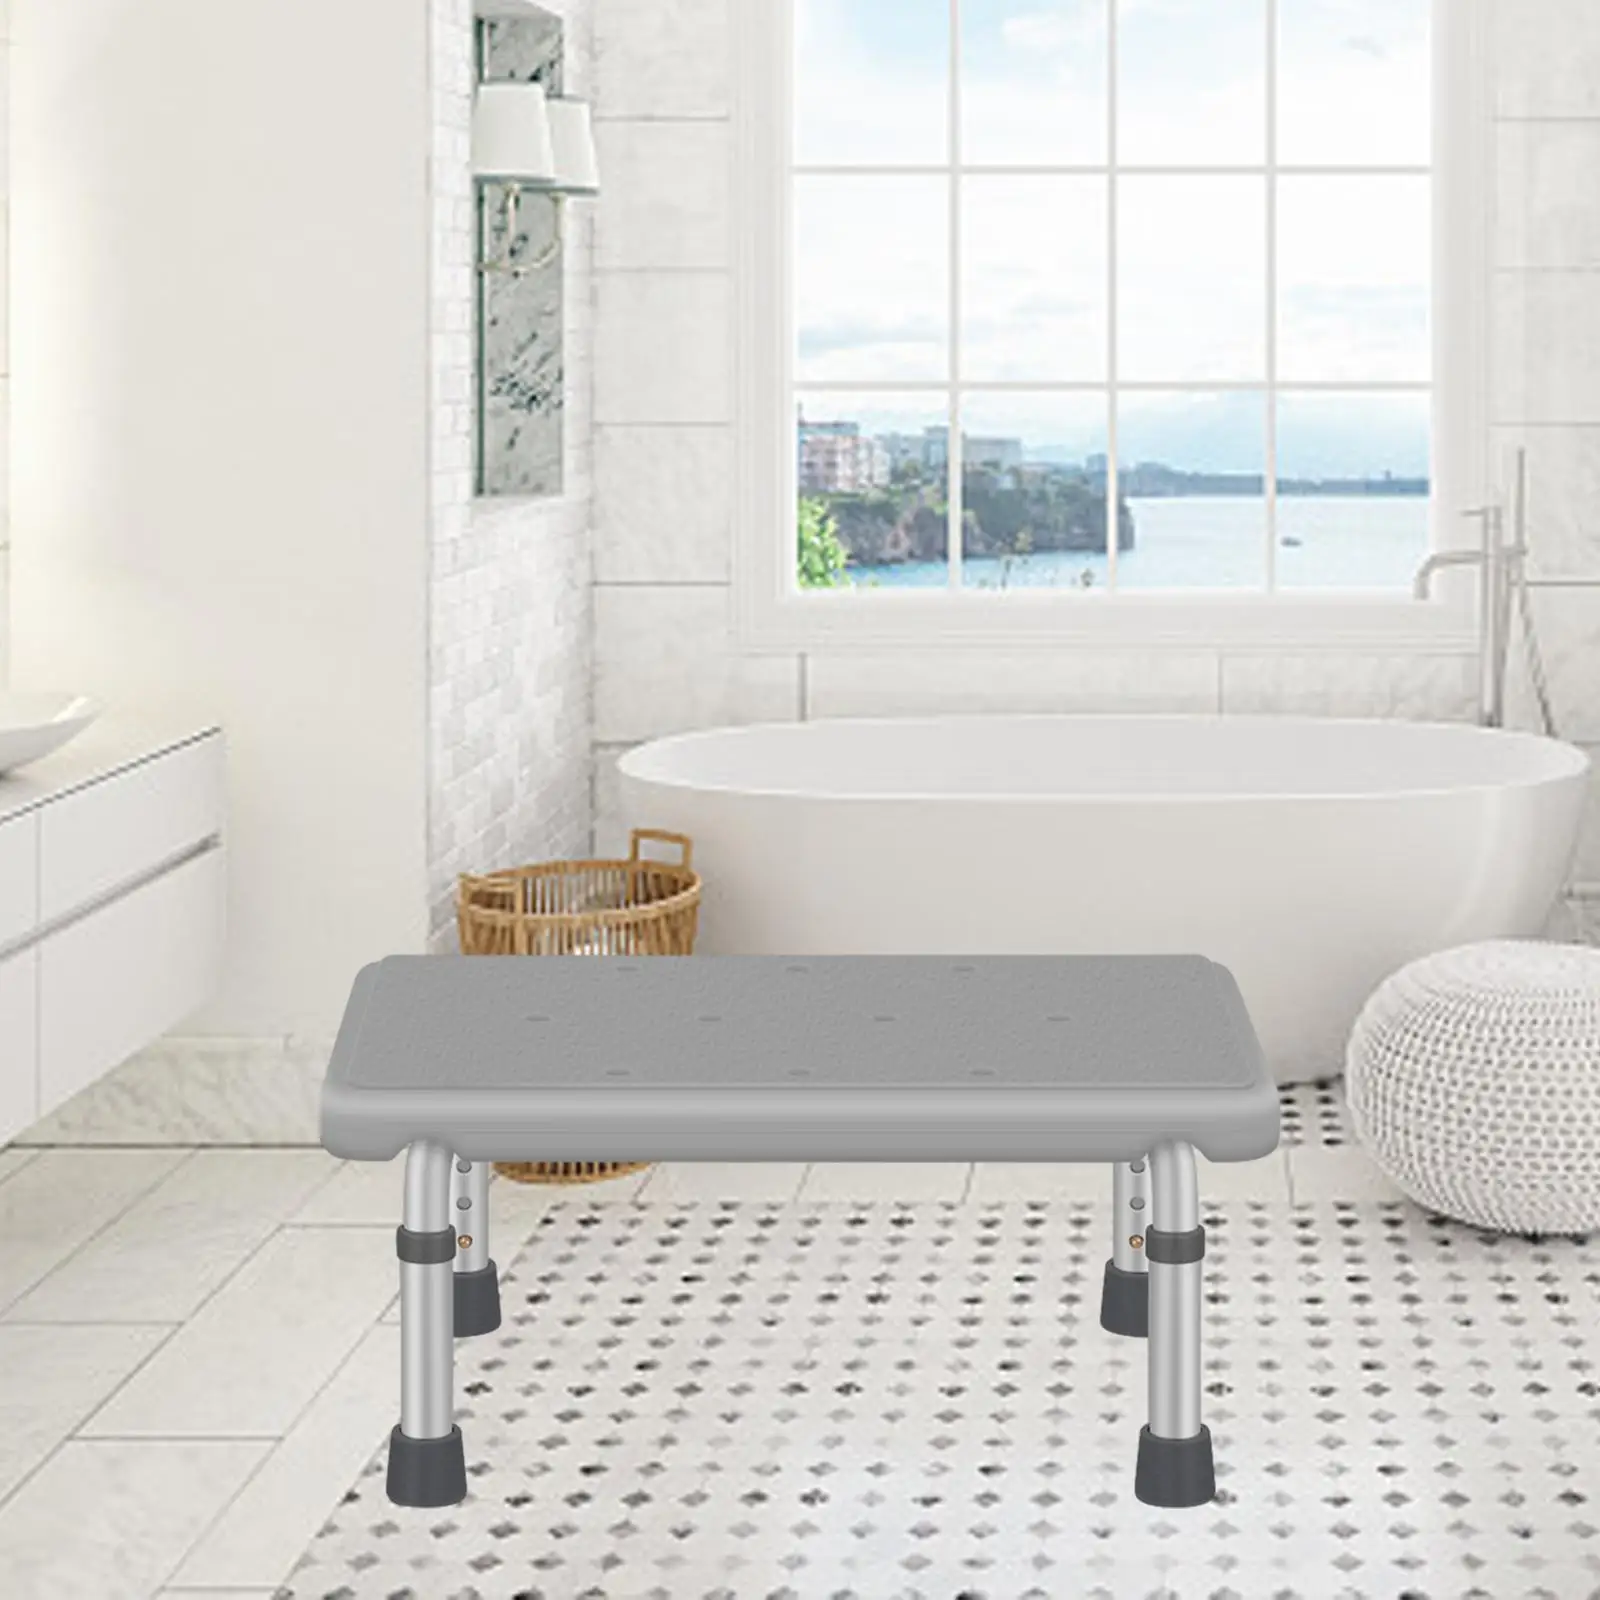 Bathtub Seat Portable Stable Lightweight Washable Multifunctional Bath Chair for Living Room Kithchen Apartment Elderly Disabled